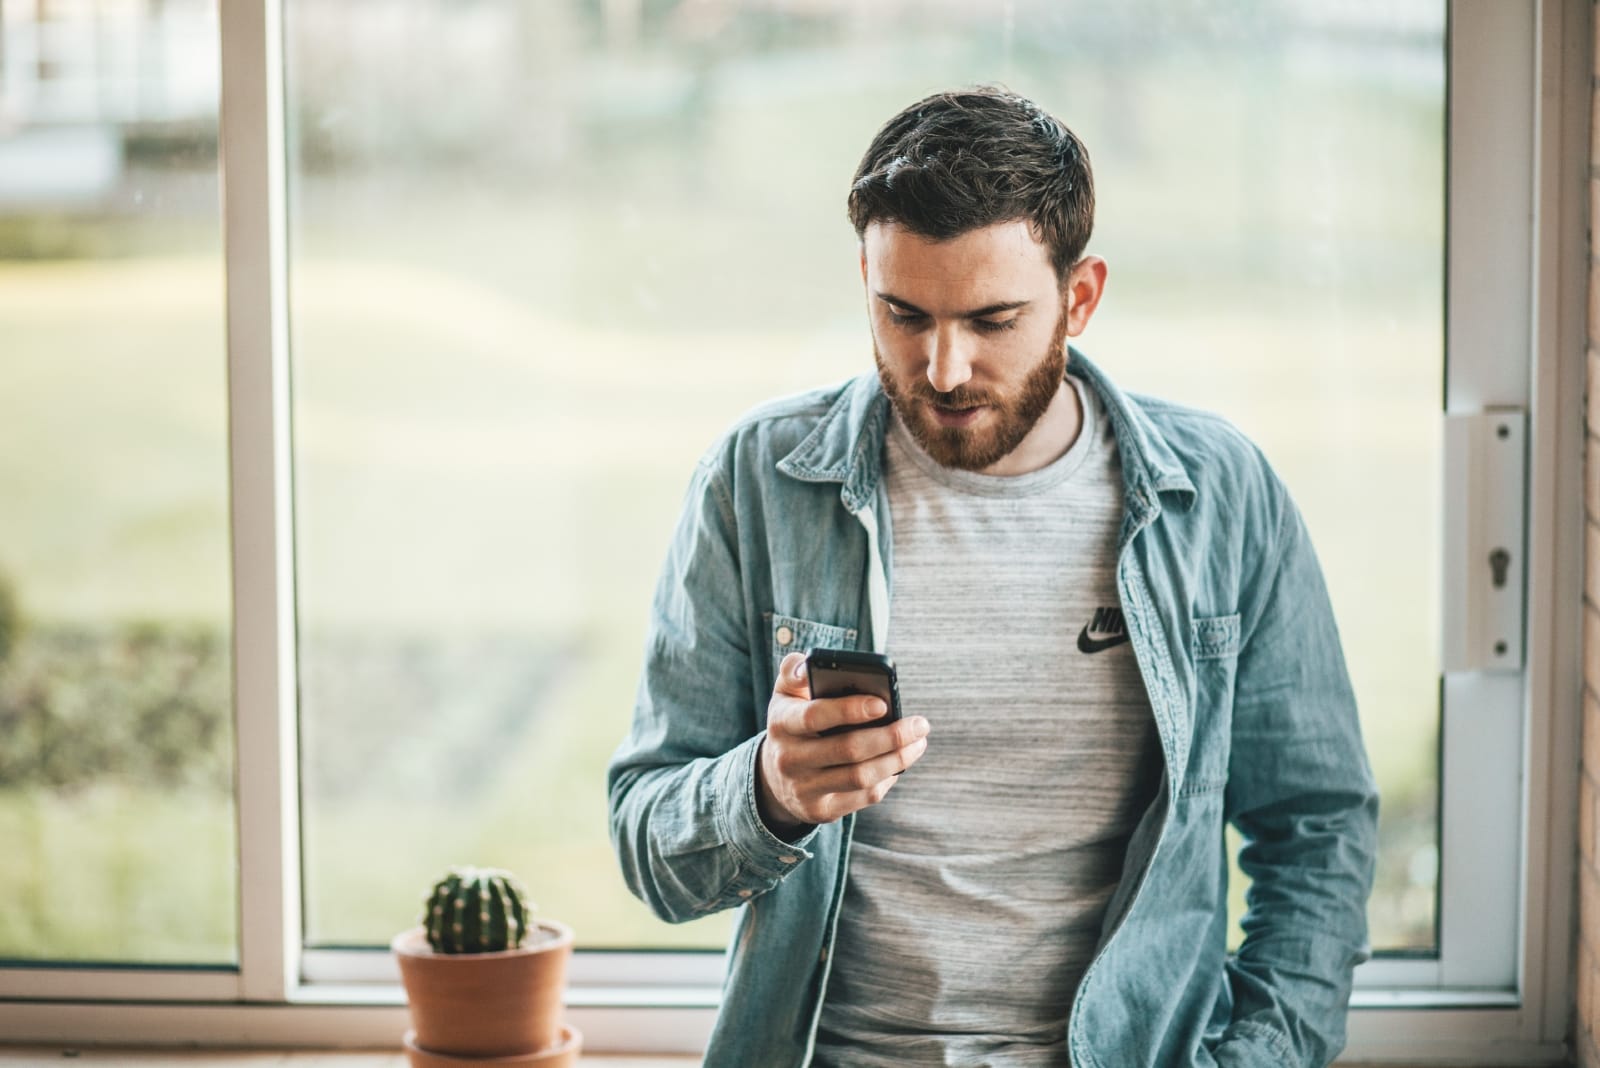 man looking at phone while standing near window